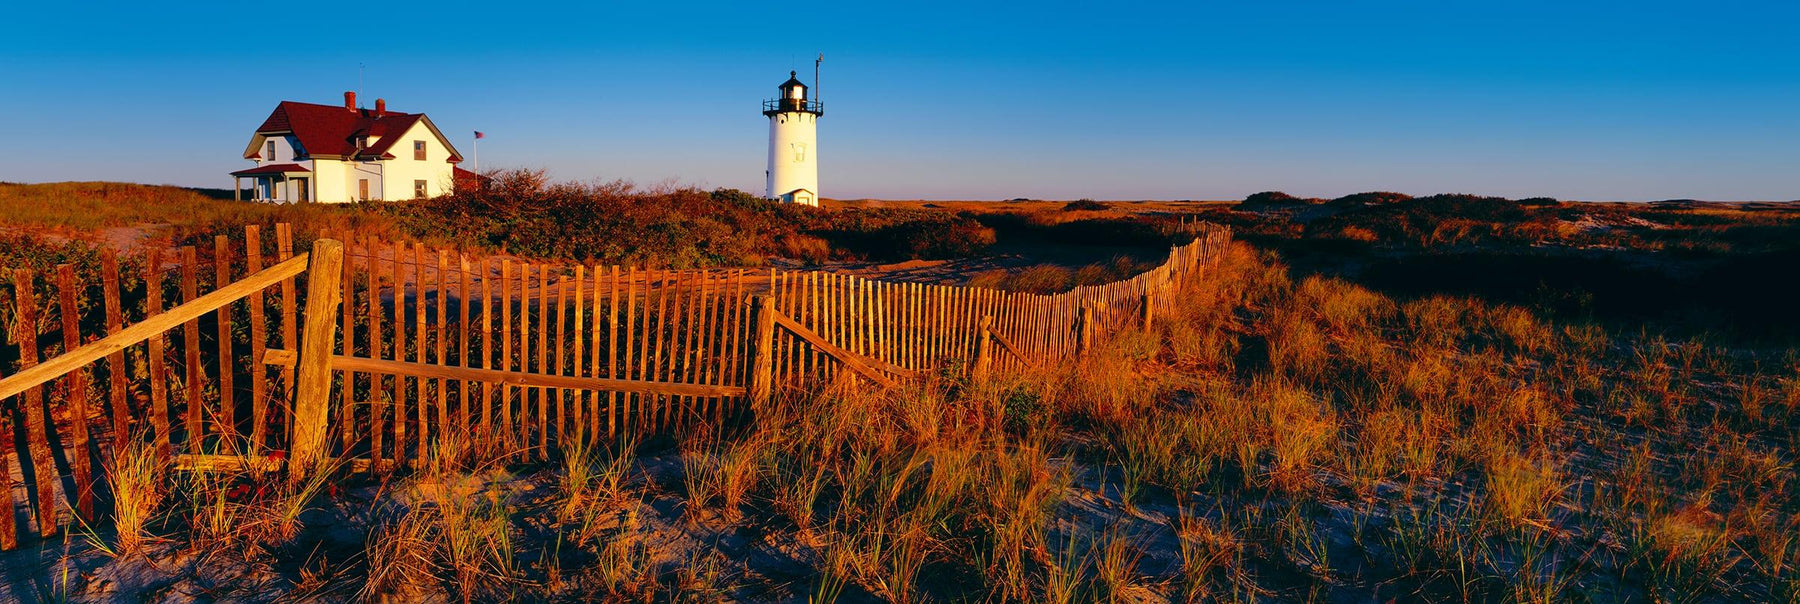 Wooden picket fence in front of a house and lighthouse on the brush covered coast of Cape Cod Massachusetts 